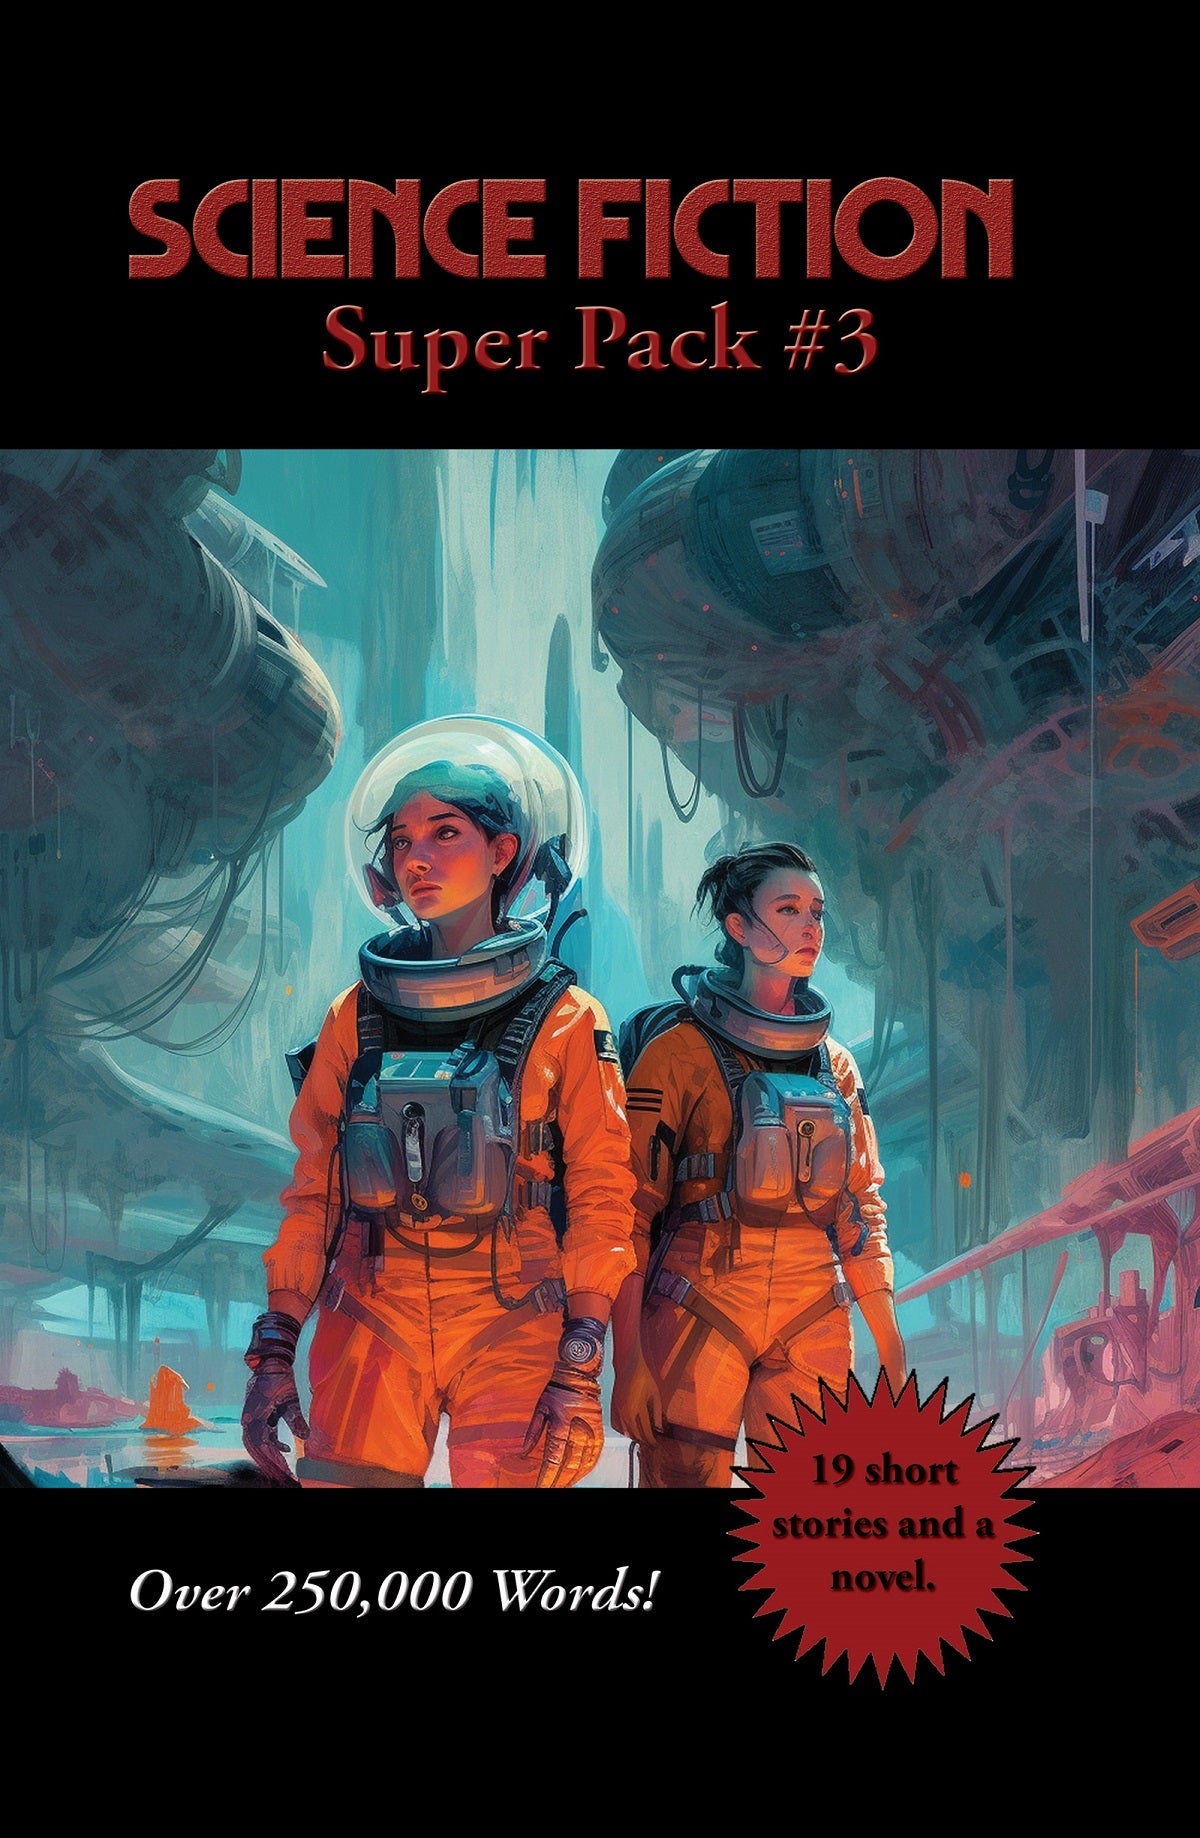 Cover art for Positronic Super Pack #53, the third Science Fiction Super Pack.